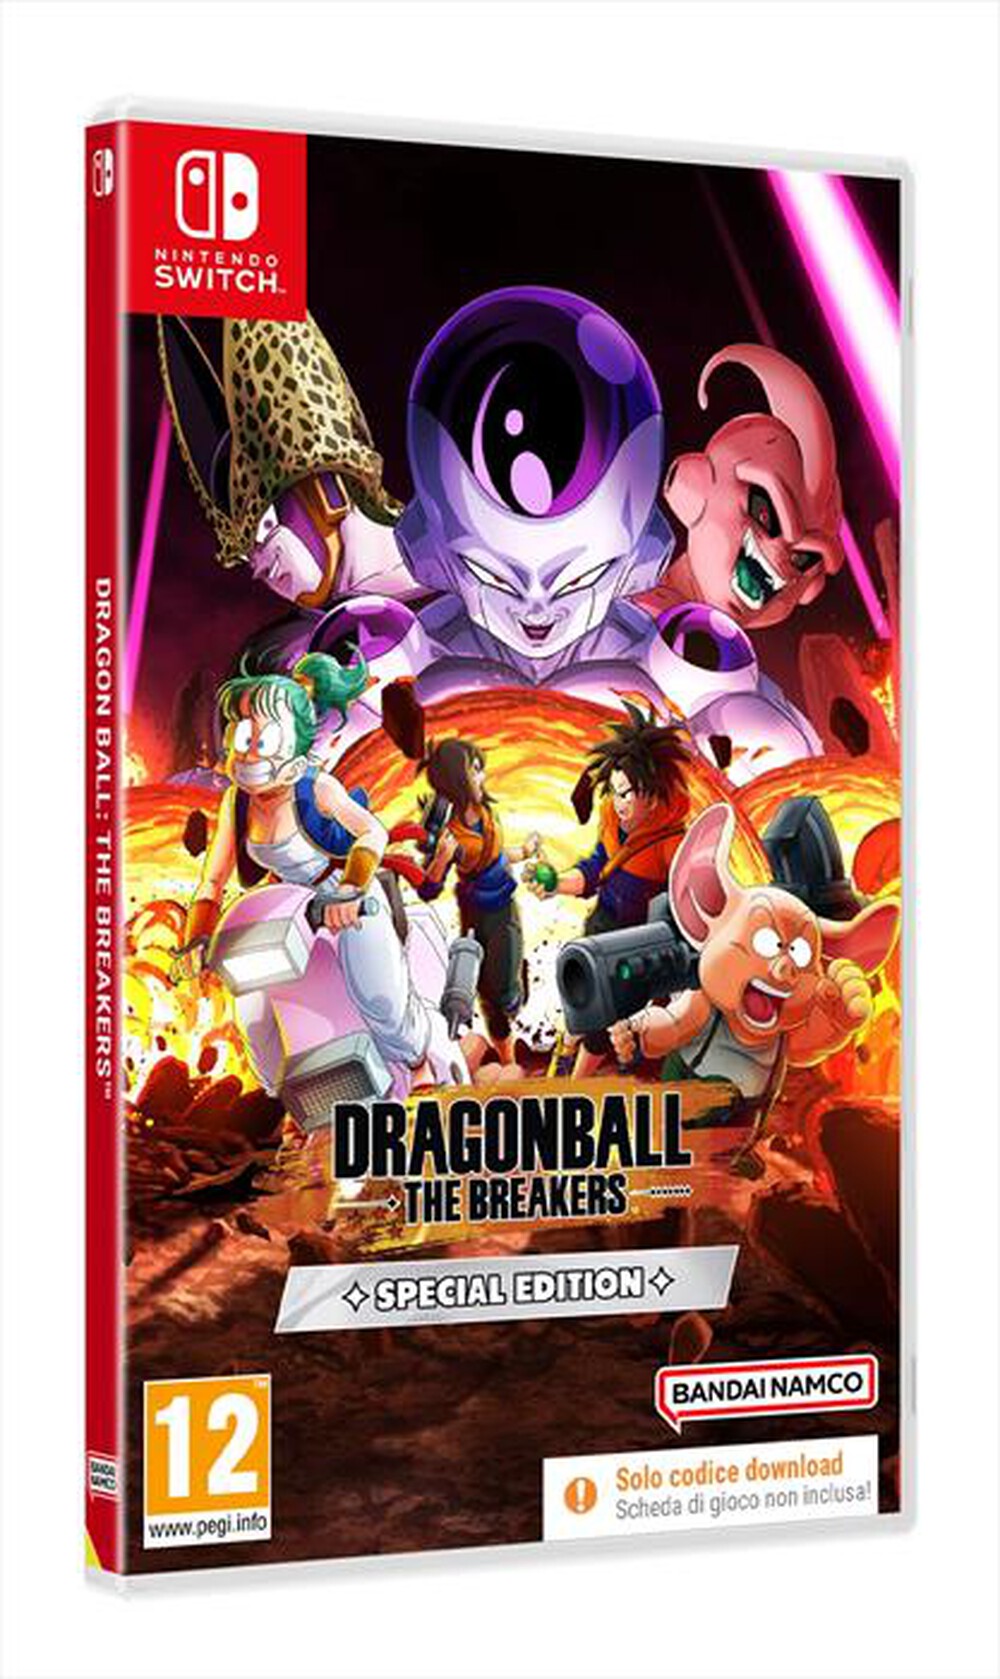 "NAMCO - DRAGON BALL: THE BREAKERS SPECIAL EDITION (CIB) SW"